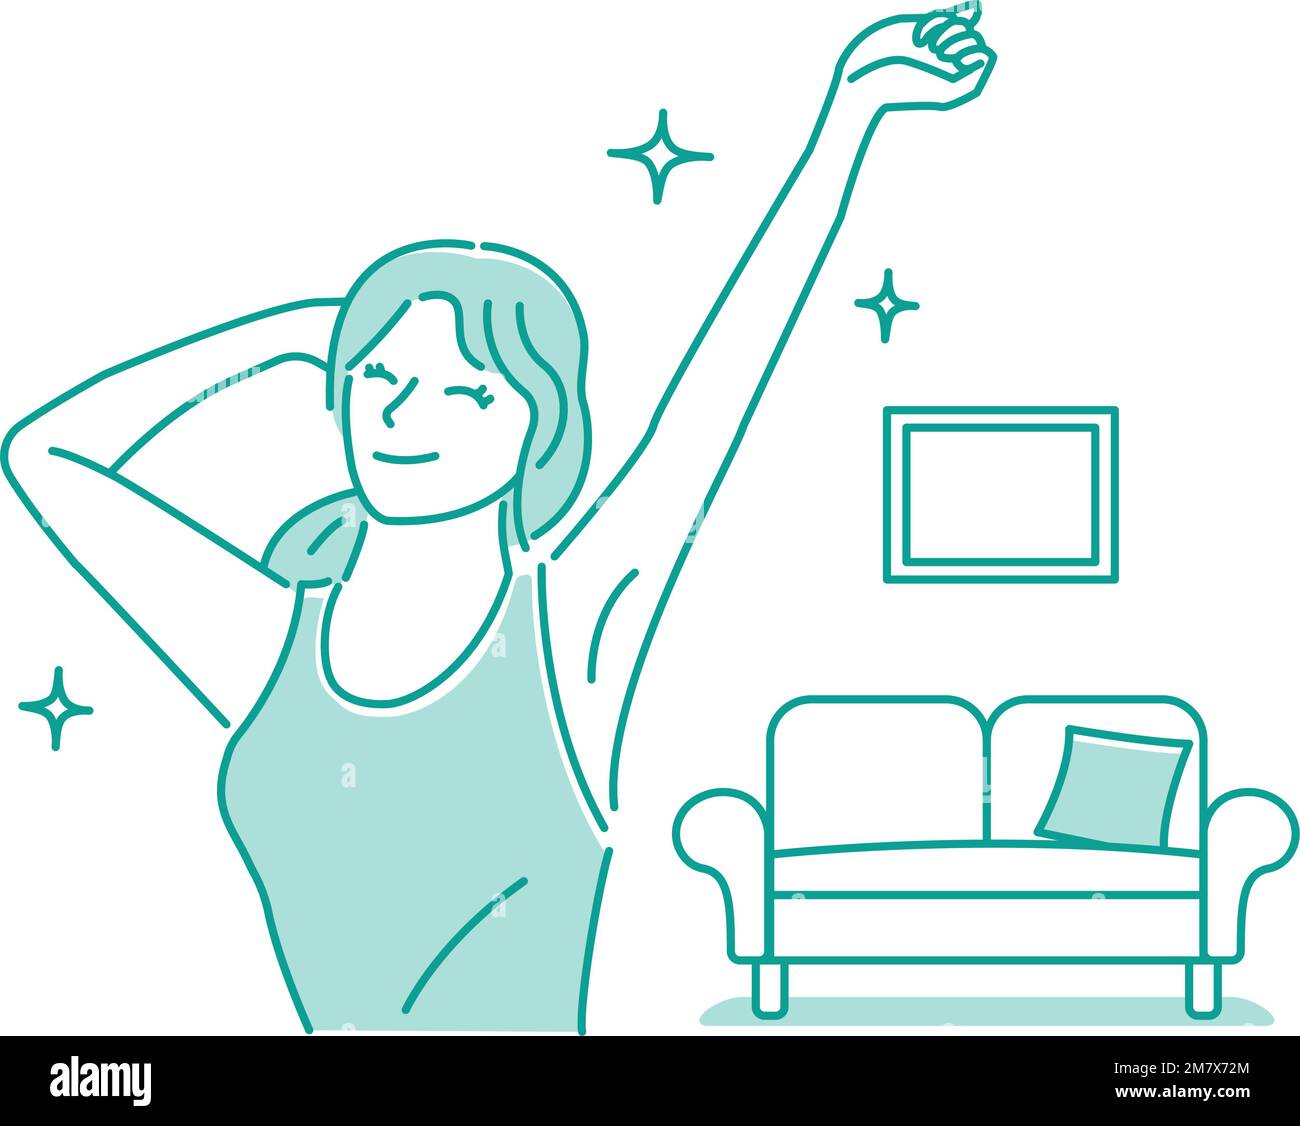 Vector illustration of a young woman stretching (healthy and positive image) Stock Vector